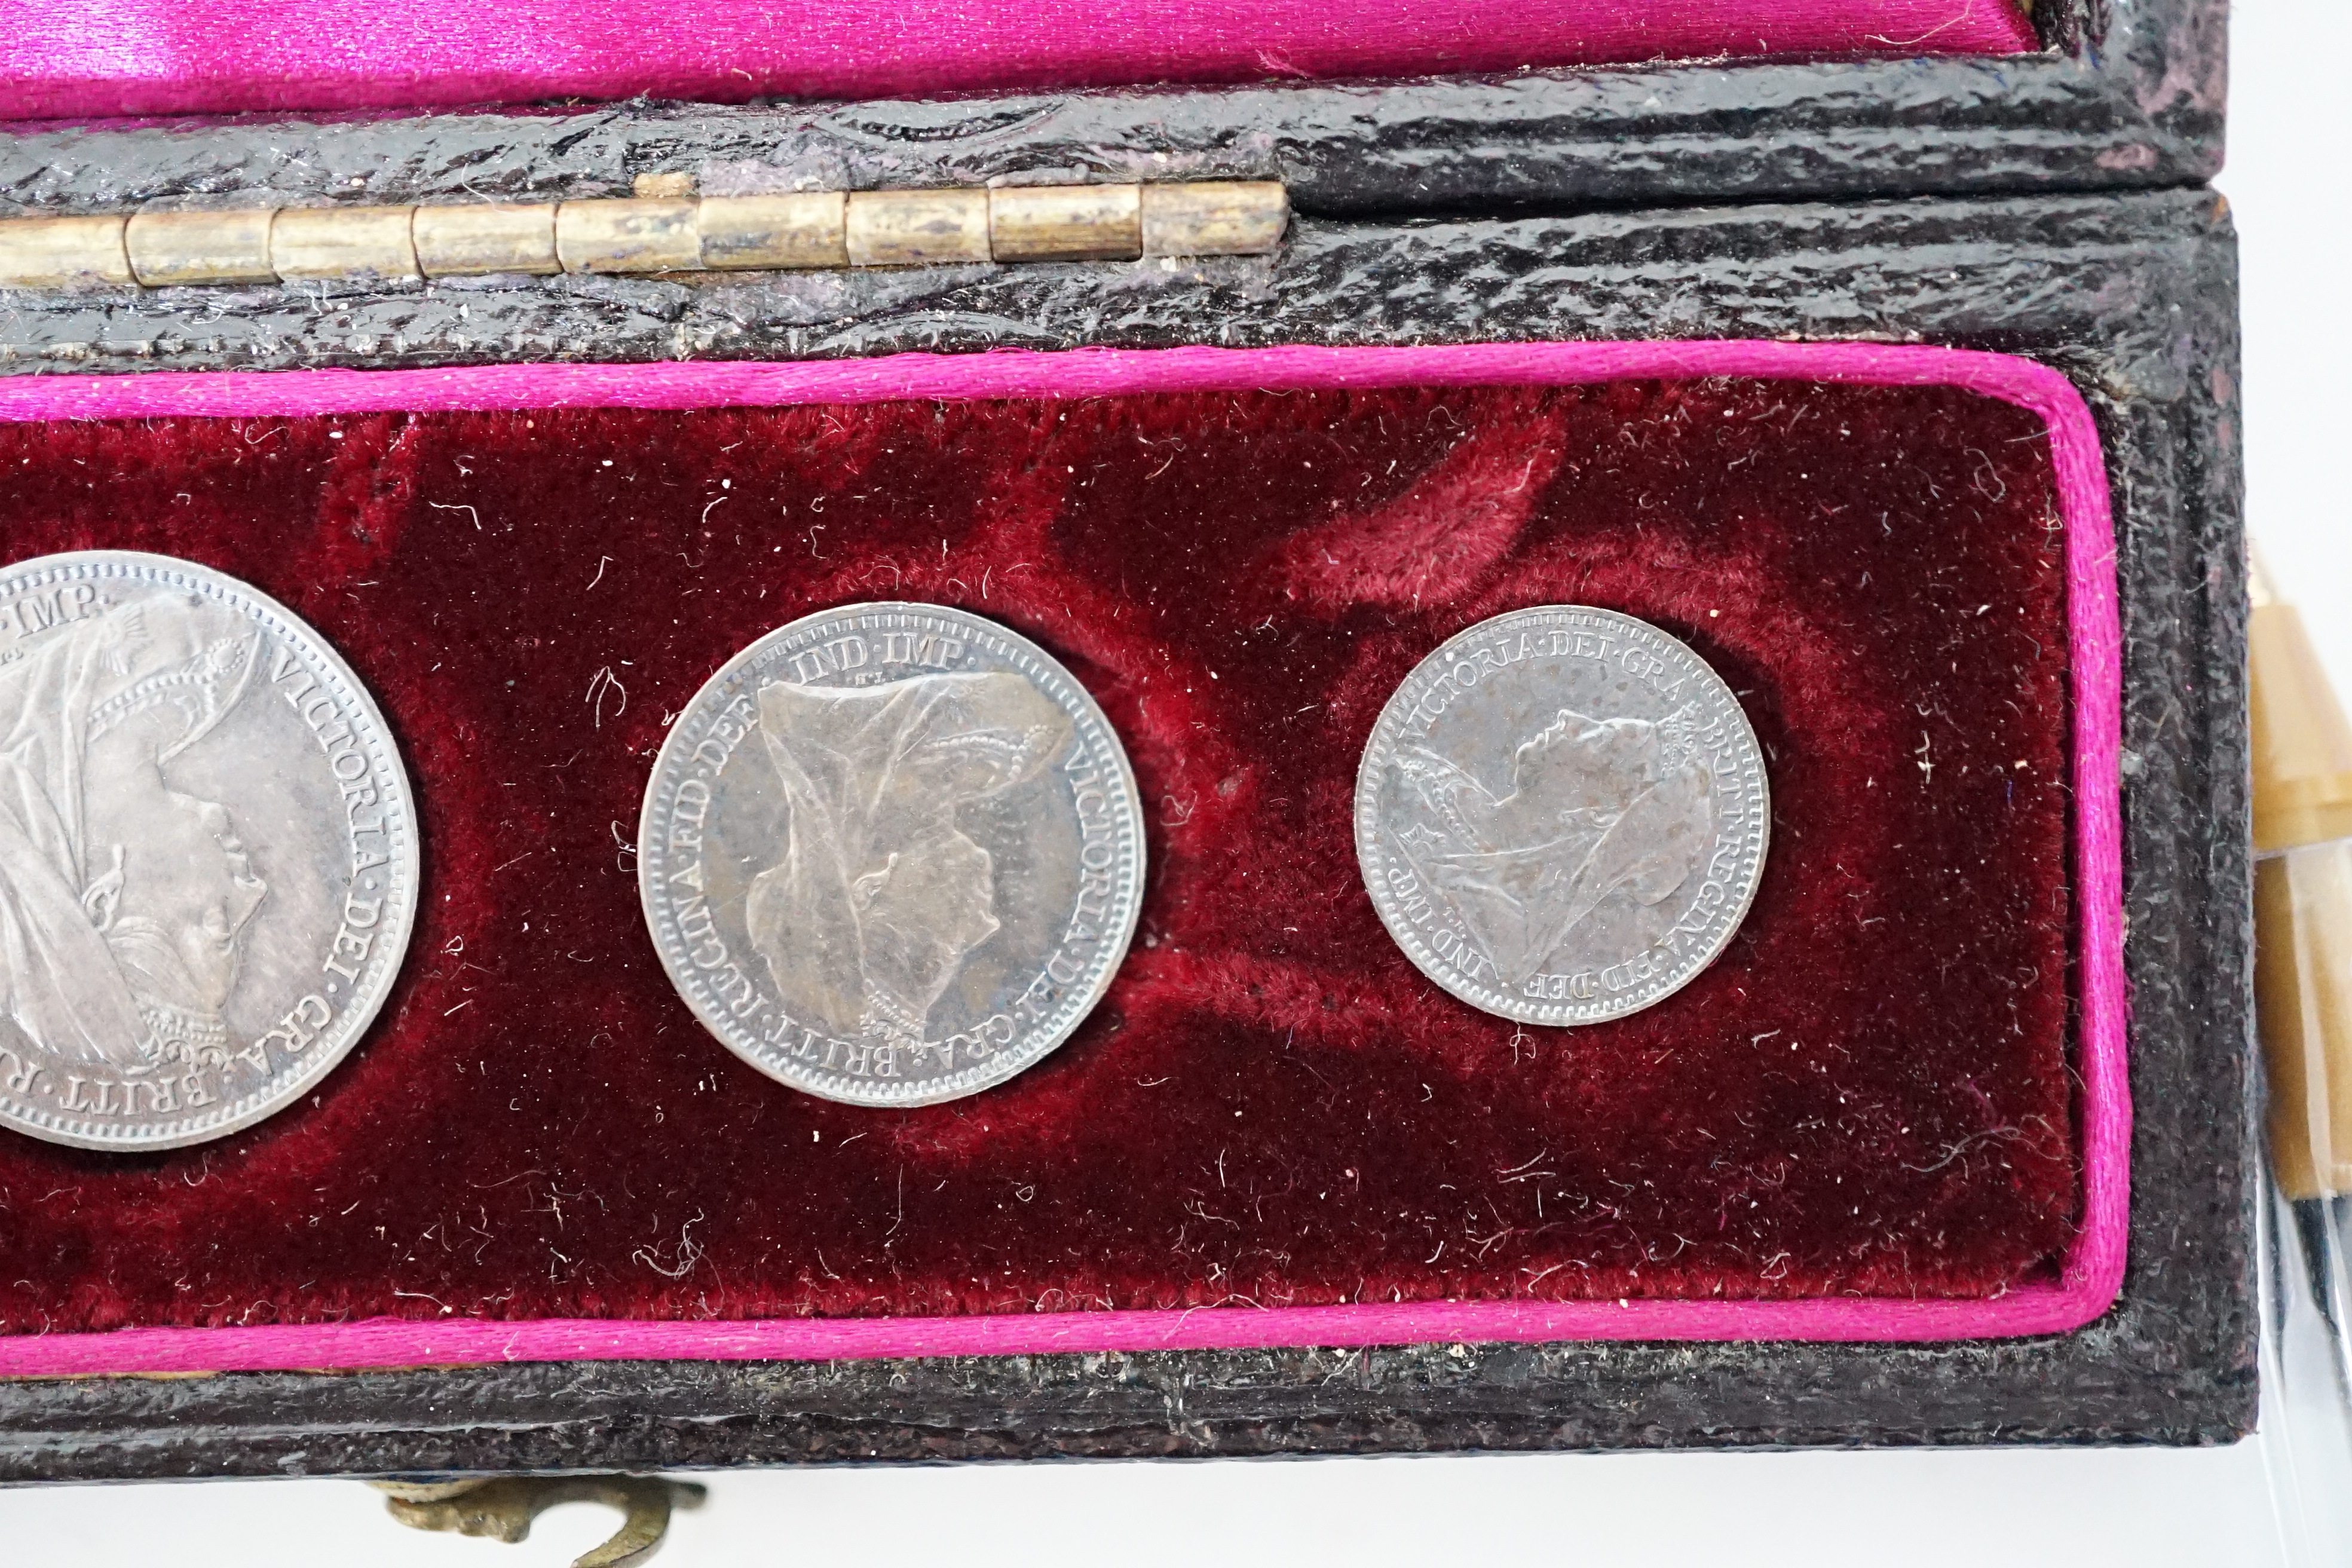 British silver coins, Victoria Maundy coin set, 1d - 4d, 1901, UNC, cased, 1895 crown, good fine, 1889 double florin, 1887 halfcrown, George IV shilling 1826, George V Crown, 1928, good VF, toned, and other various coins